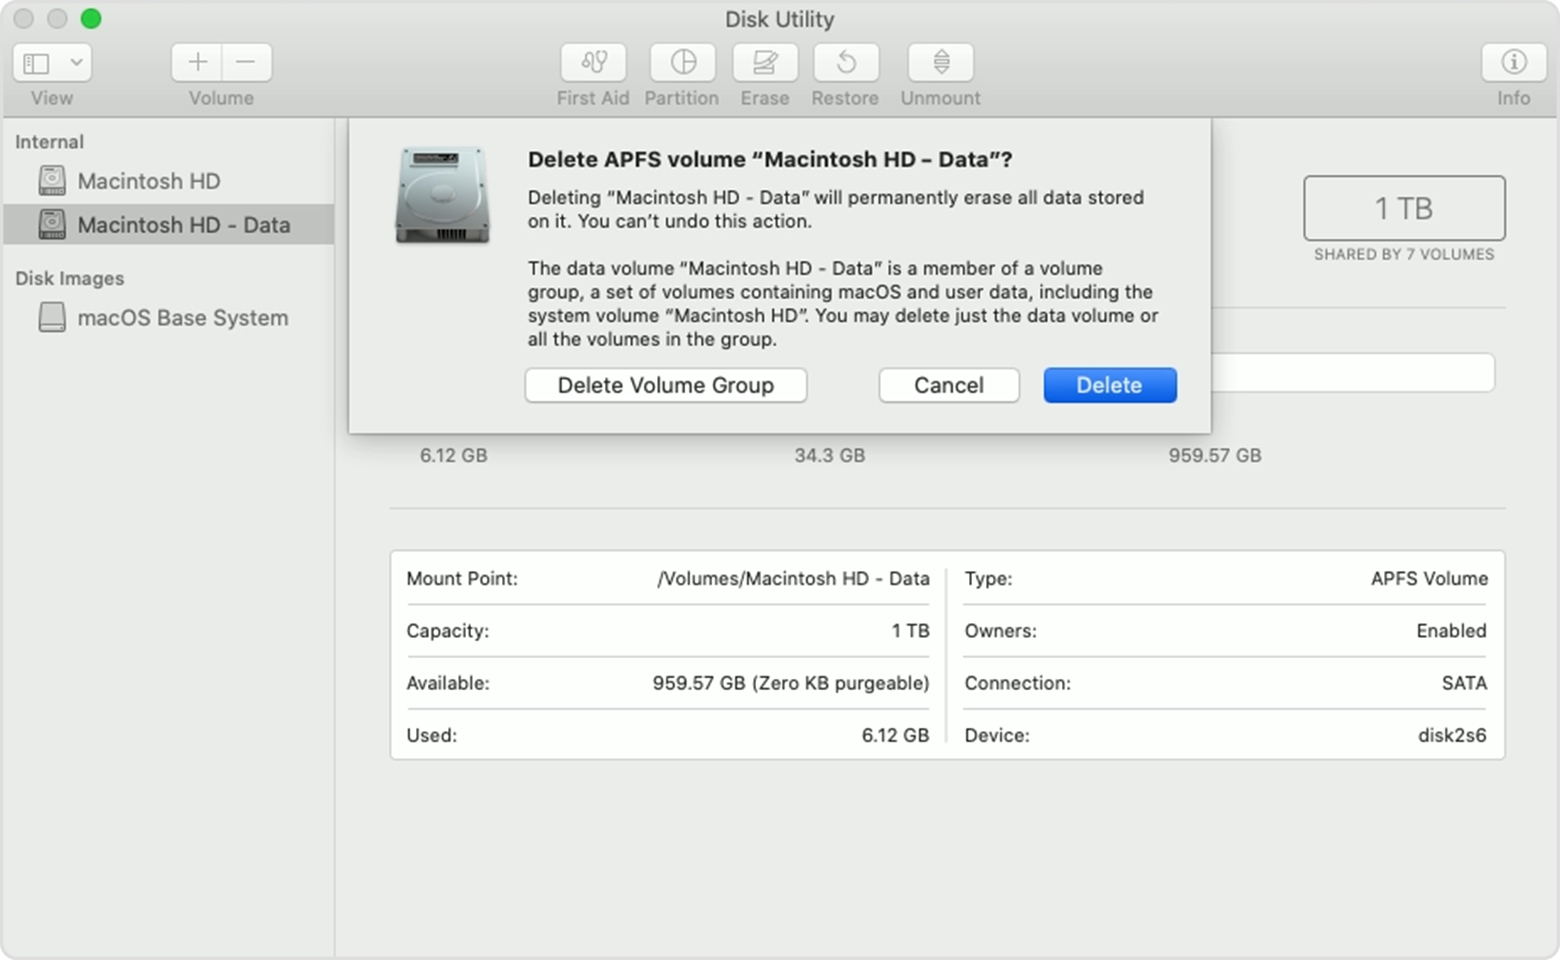 how to format hard disk for mac and windows